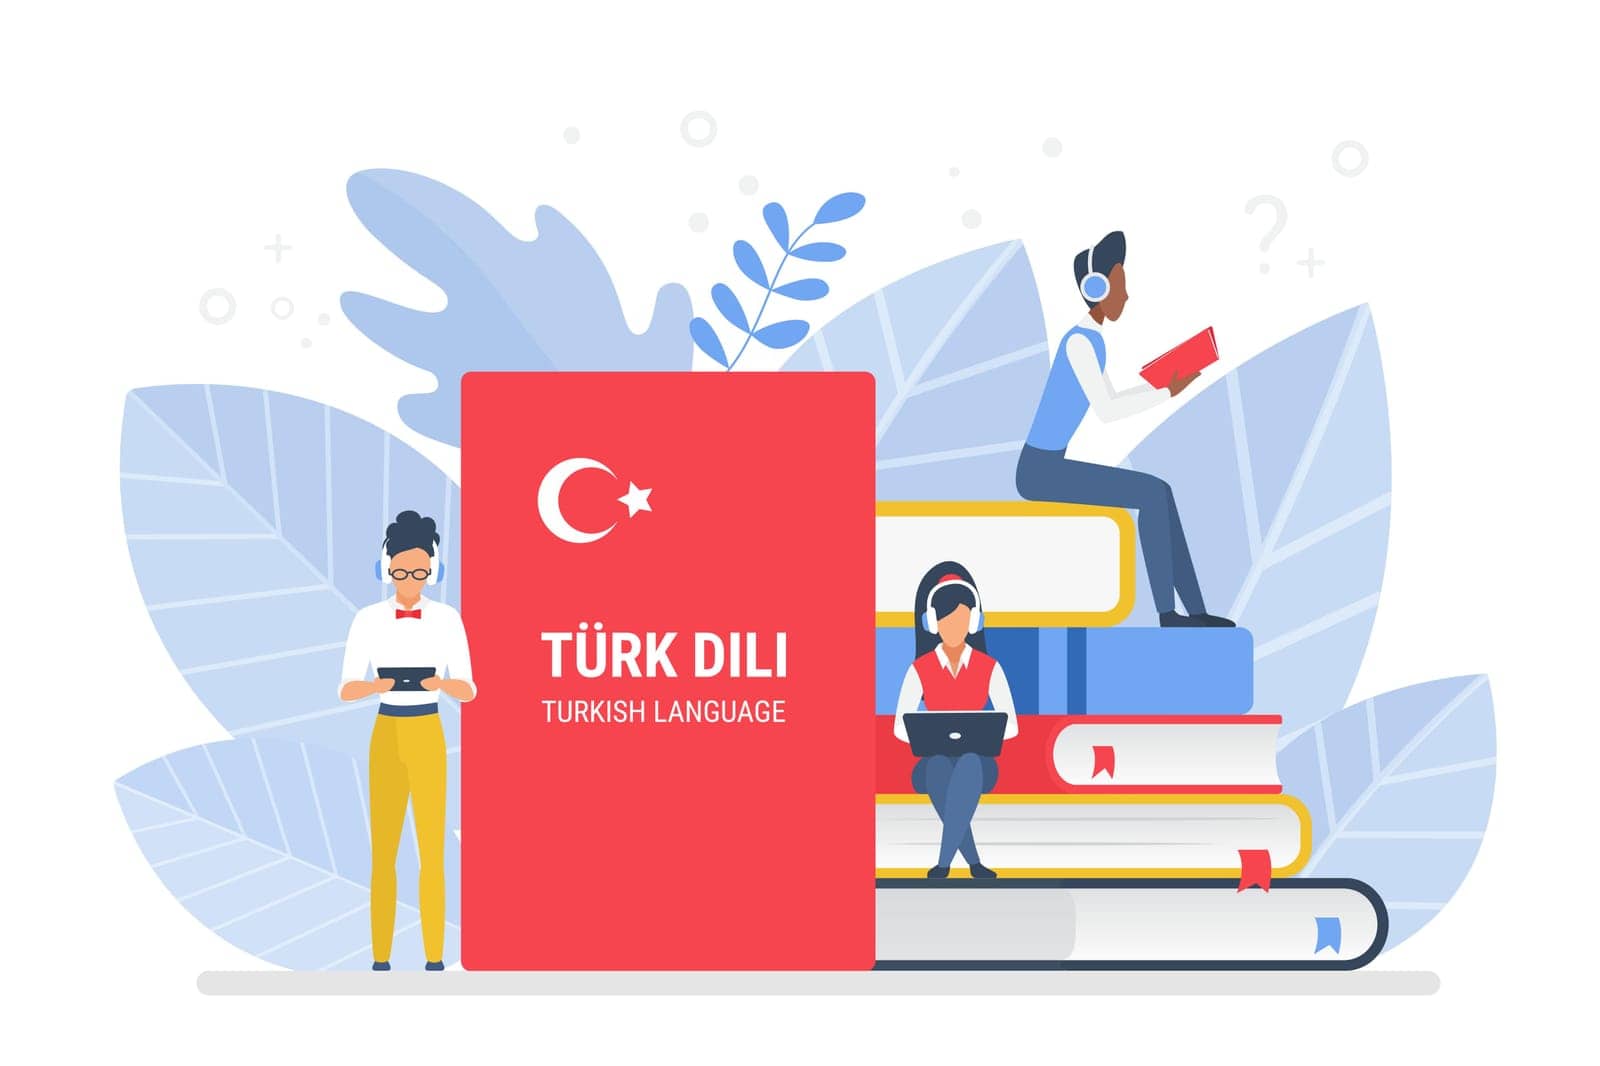 People learning Turkish language vector illustration. Turkey distance education, online learning courses concept. Students reading books cartoon characters. Teaching foreign languages.